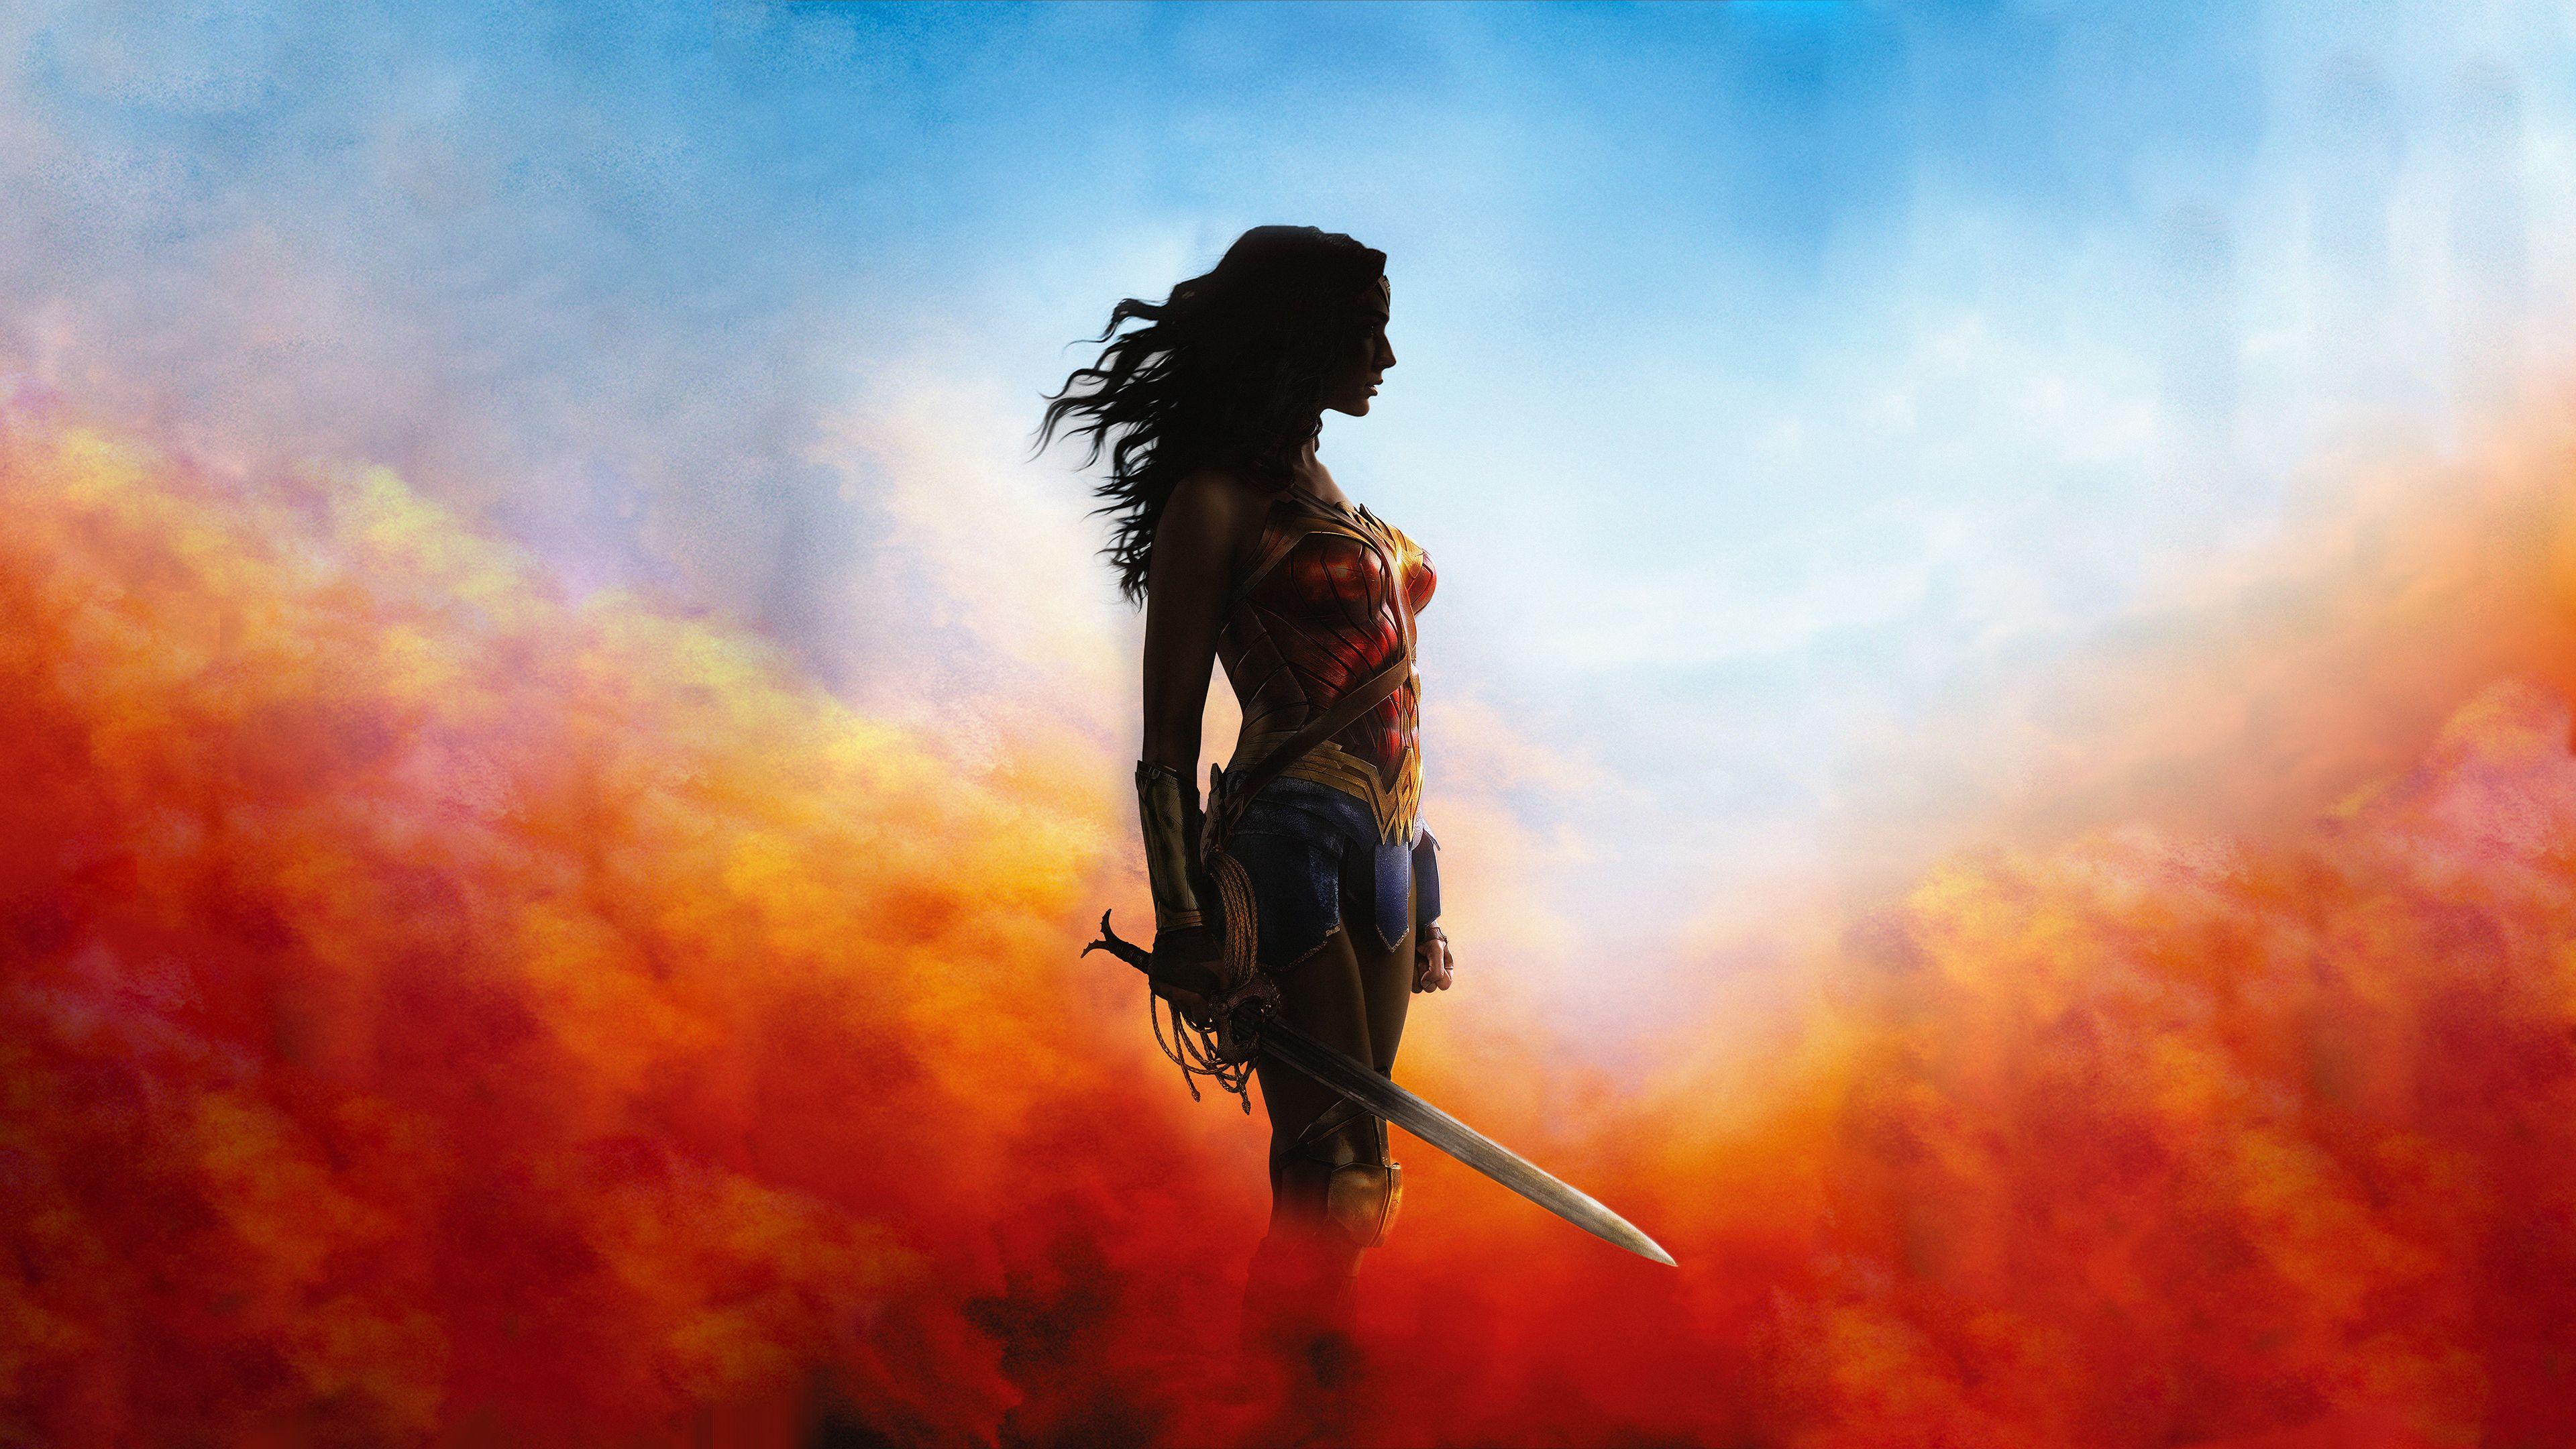 Wonder Woman Backgrounds Wallpapers - Wallpaper Cave